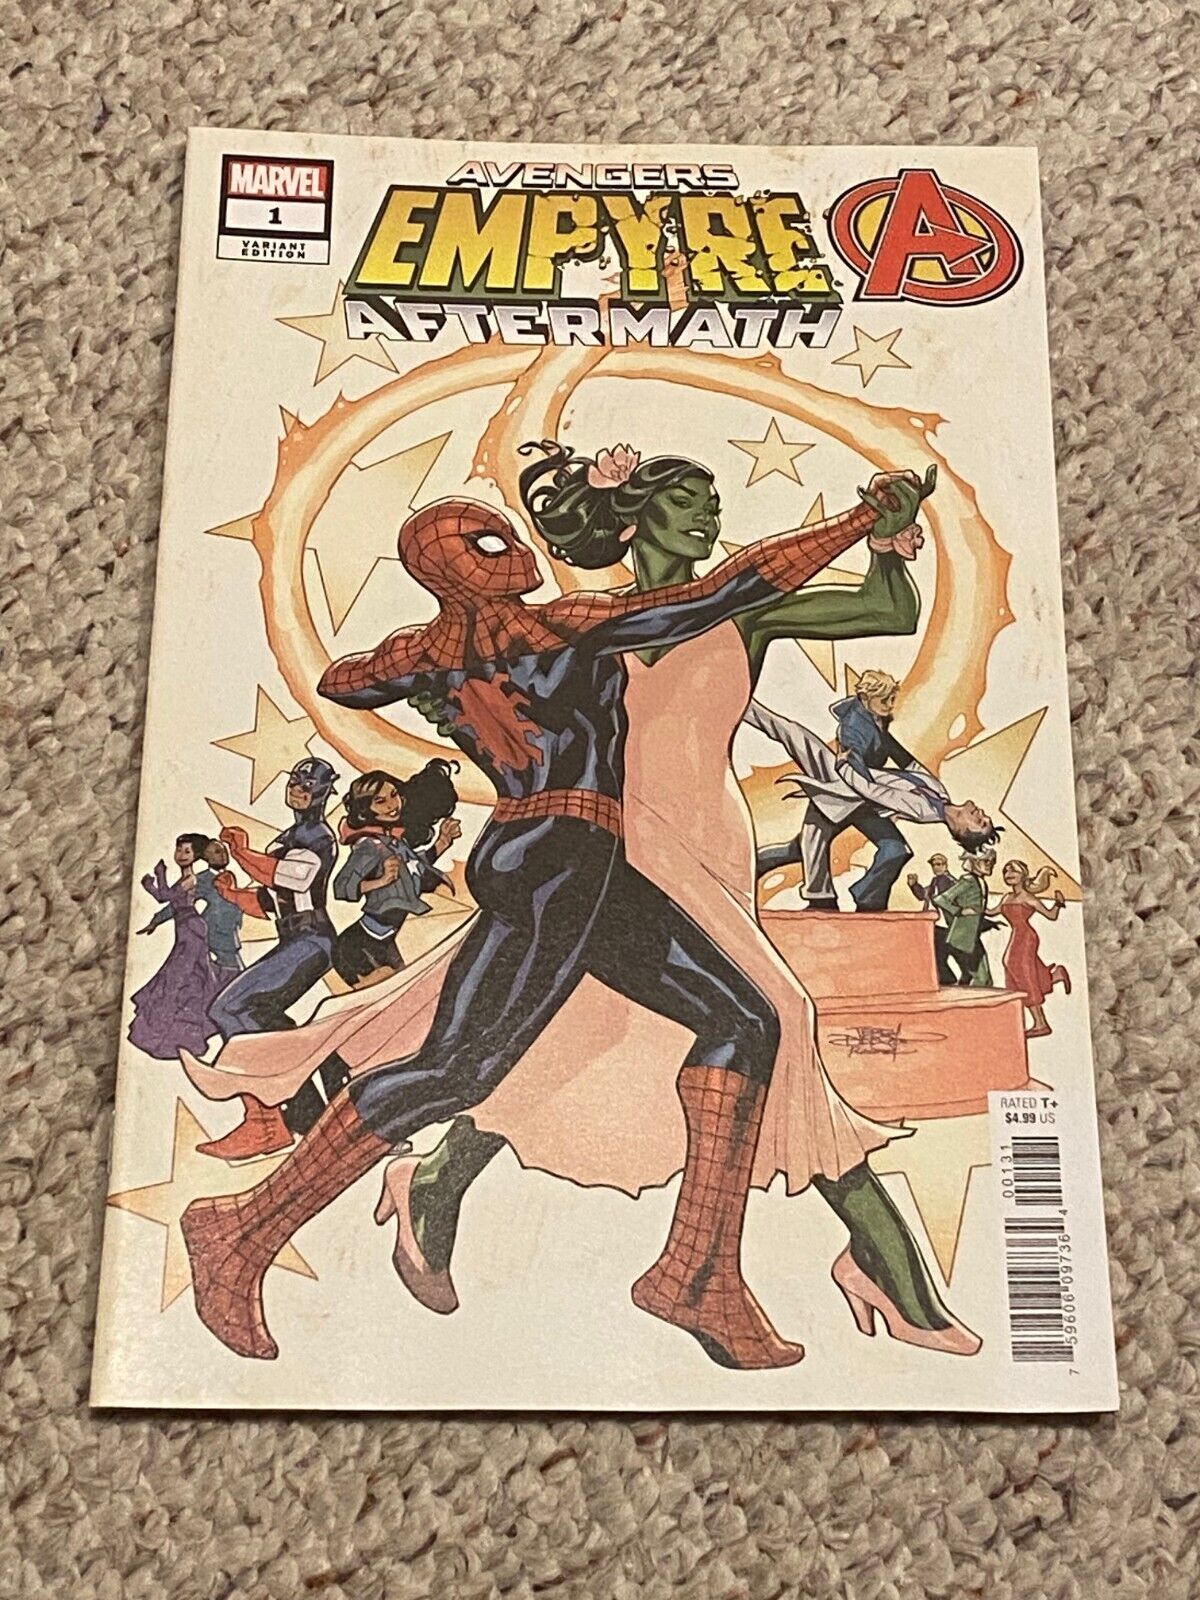 AVENGERS EMPYRE AFTERMATH #1 WITH VARIANT COVER BY TERRY DODSON